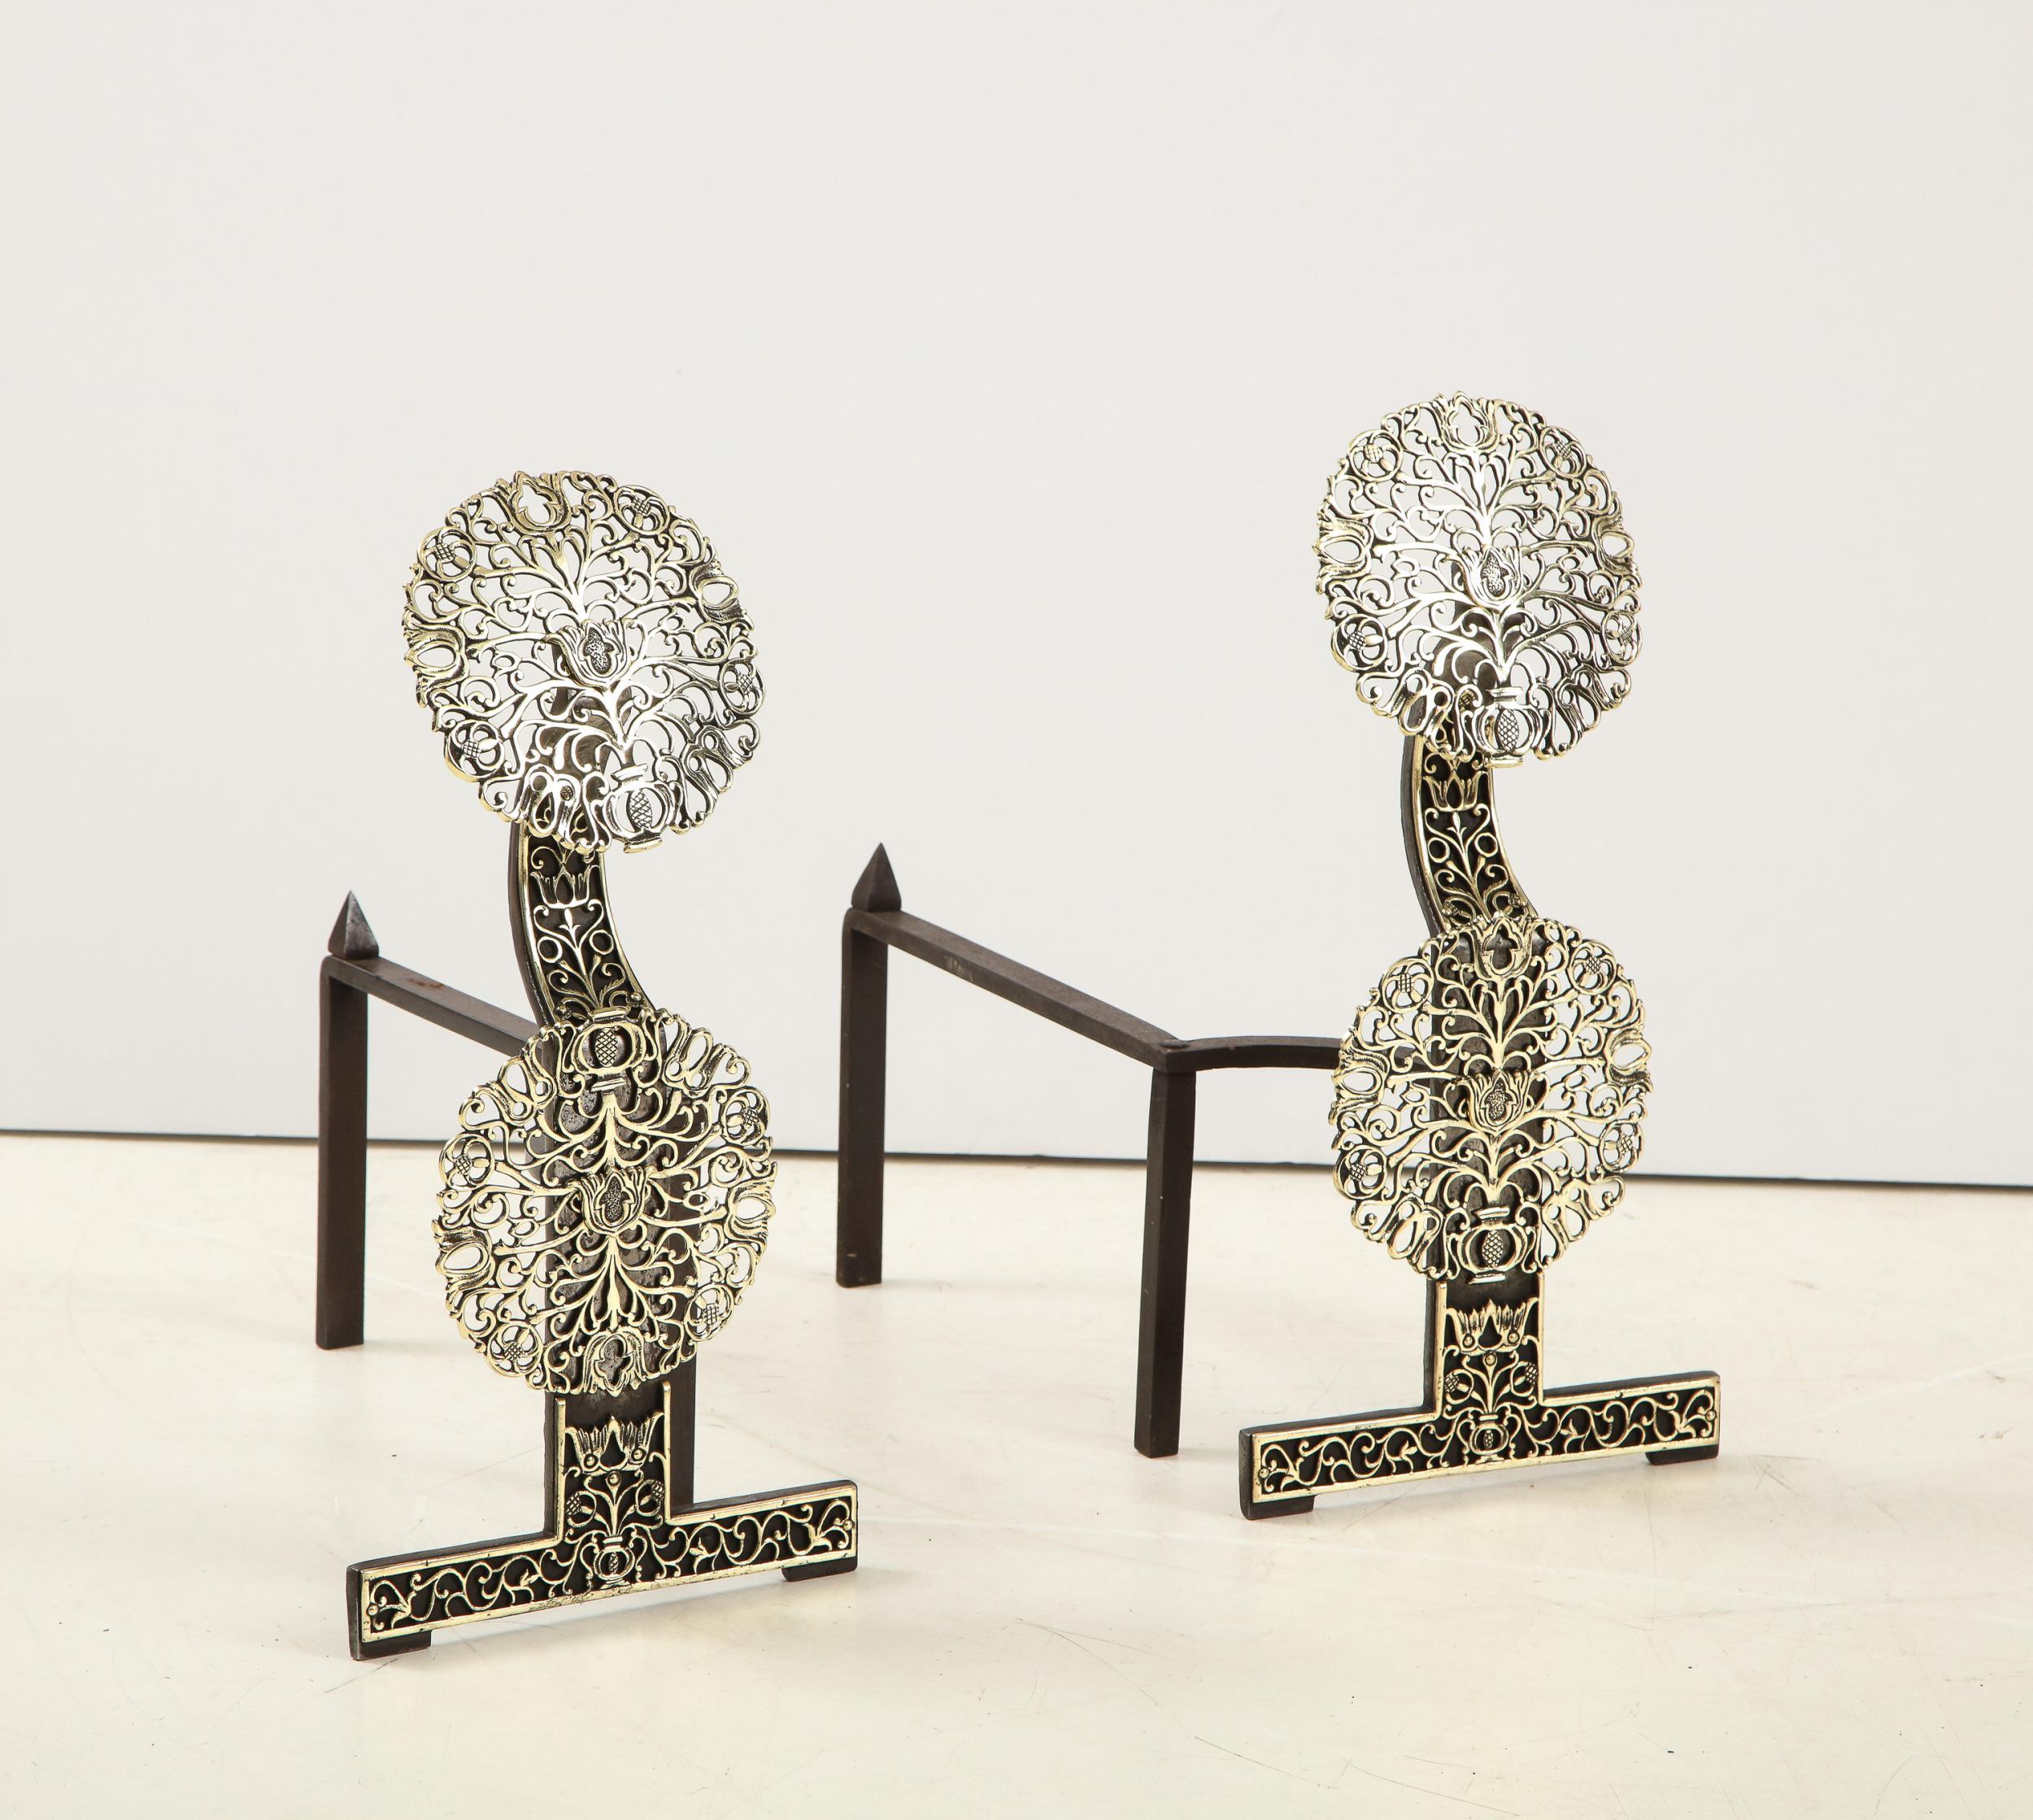 Fine pair of English Arts and Crafts mixed metal andirons in the manner of Ernest Gimson, having pierced brass bosses depicting vines and flower heads, on shaped wrought iron shafts and standing on 